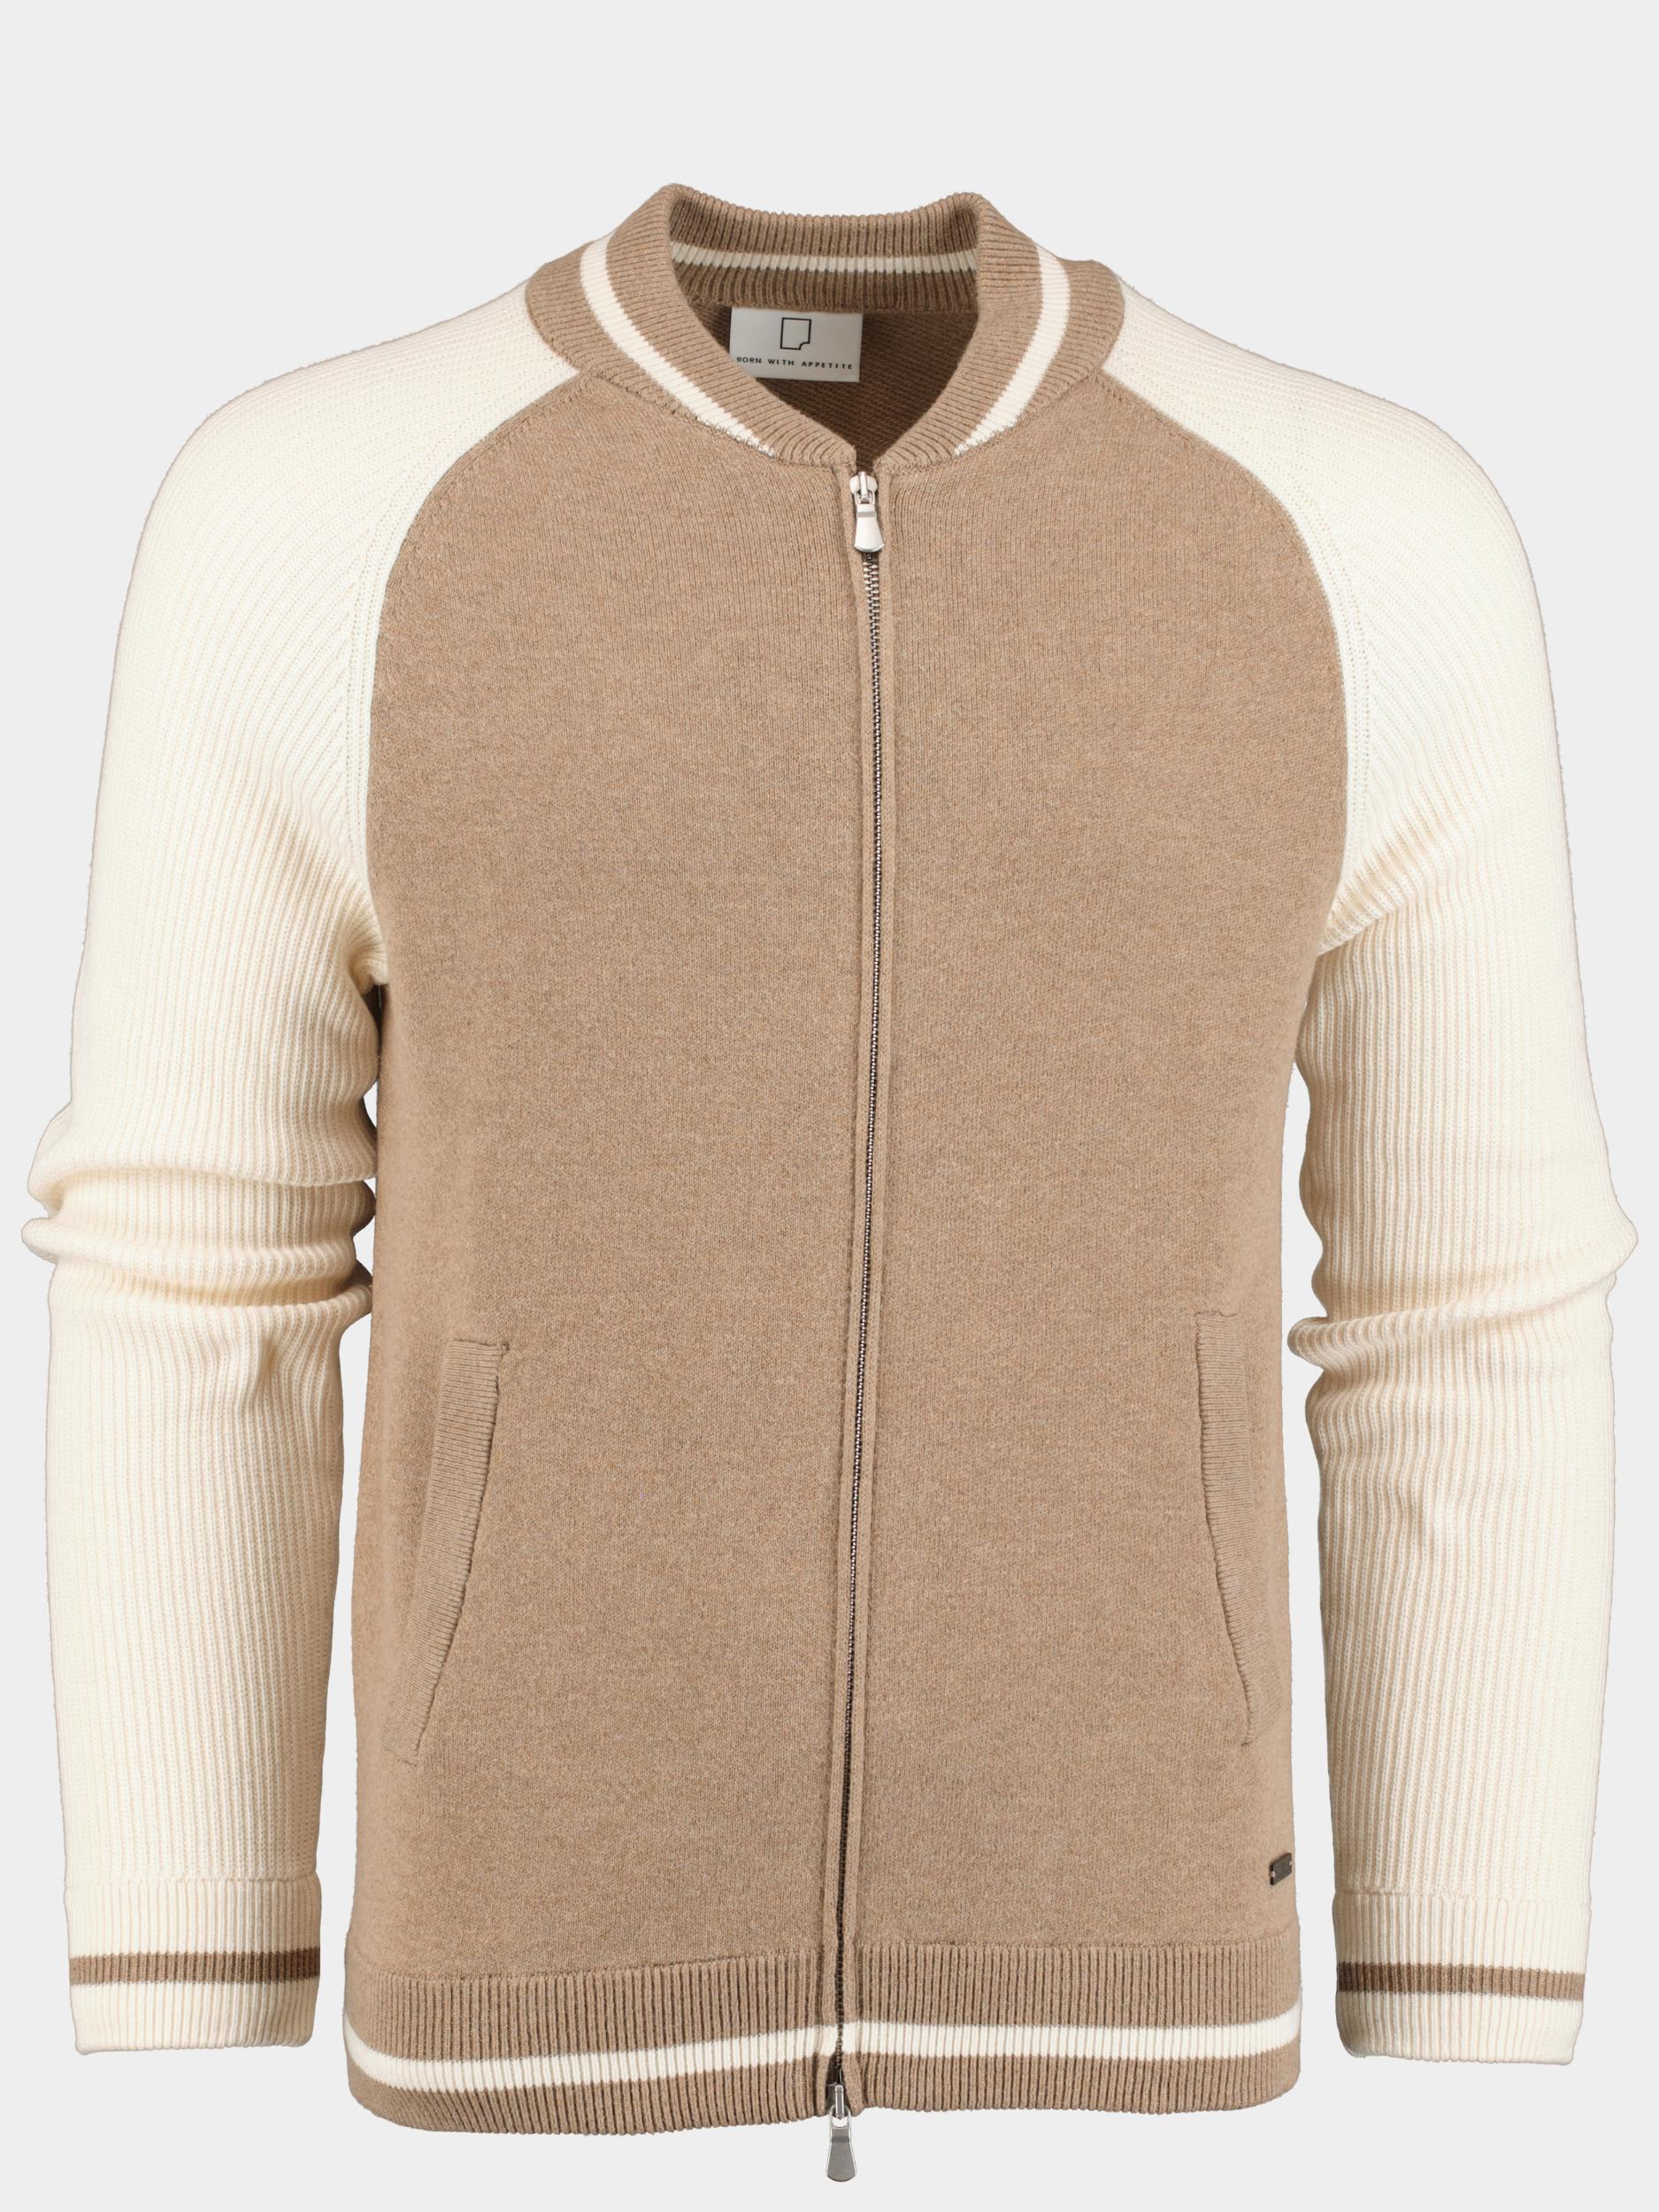 Born With Appetite Vest Beige Max Bomber 2 Color 23305MA17/820 sand